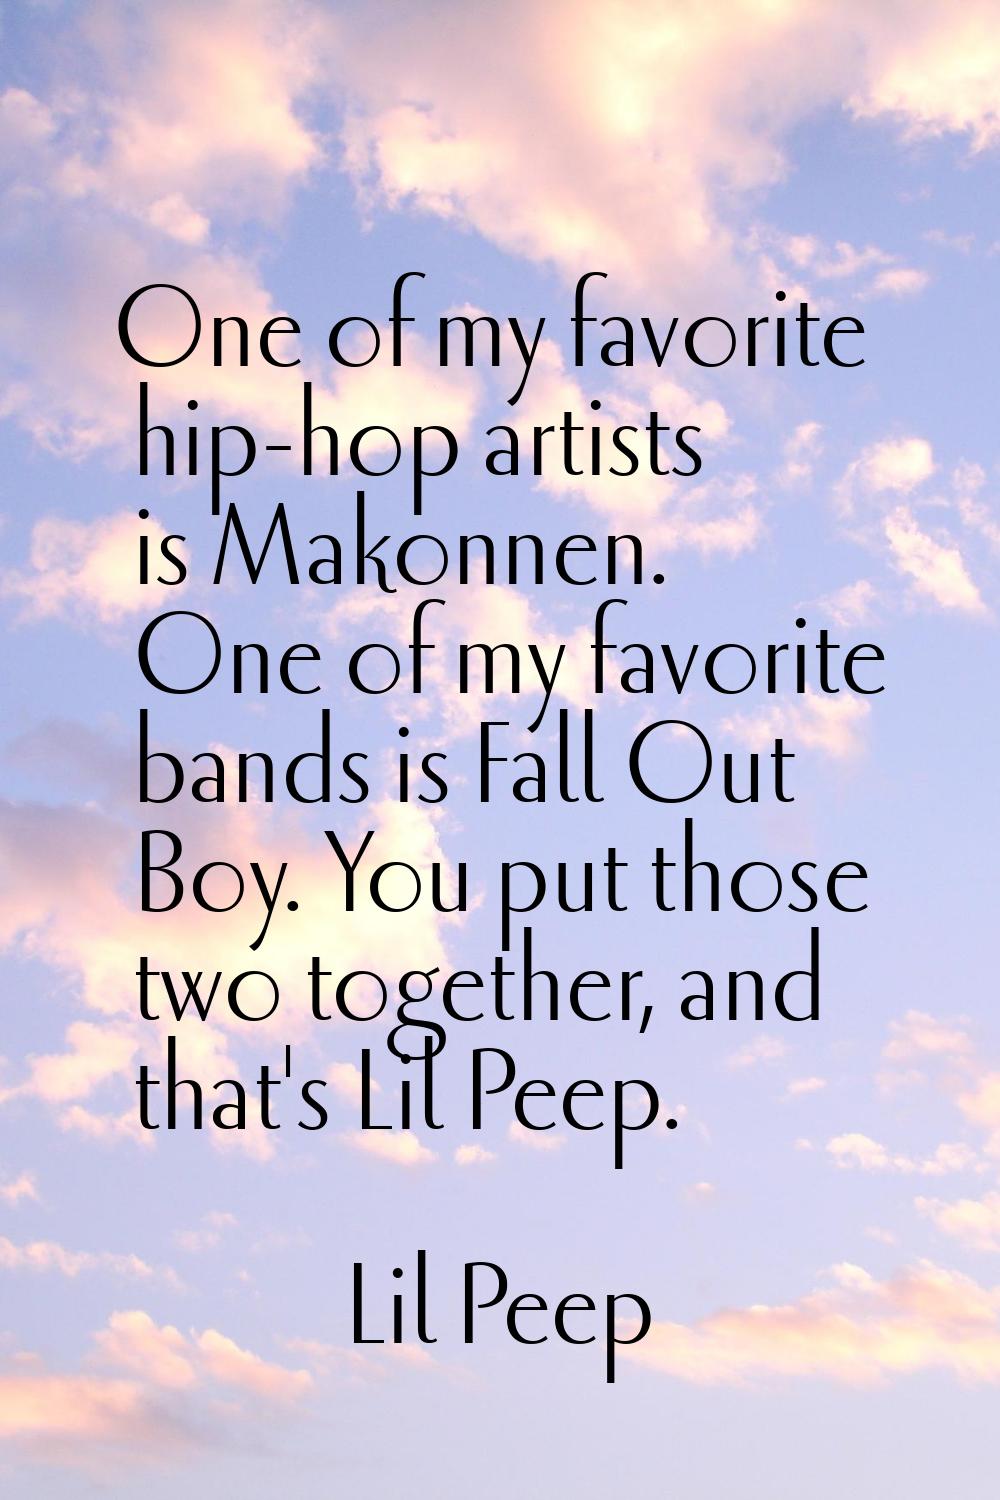 One of my favorite hip-hop artists is Makonnen. One of my favorite bands is Fall Out Boy. You put t